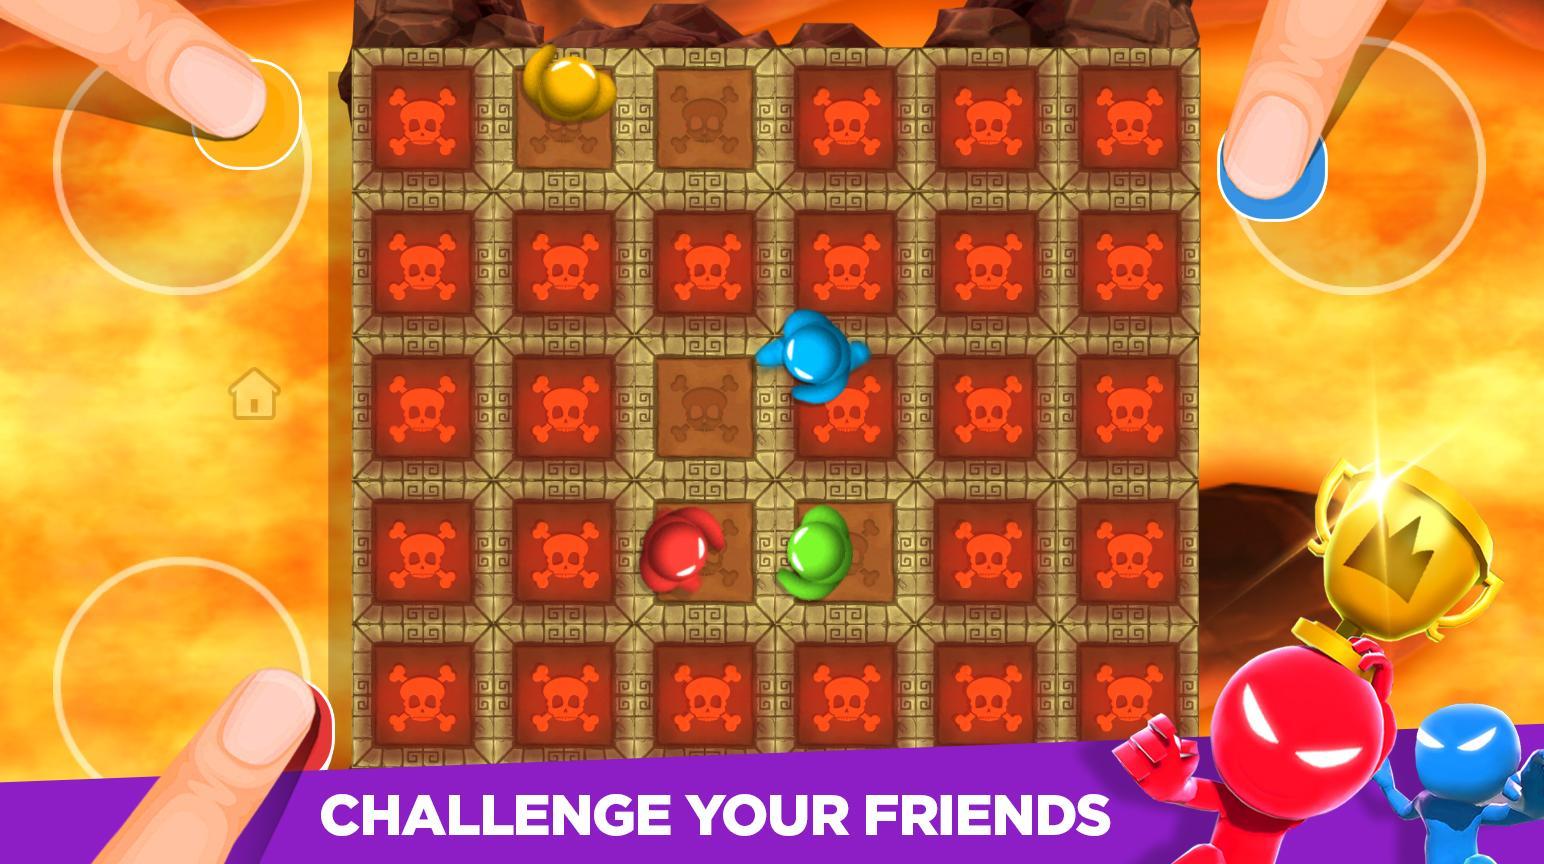 2 Player games : the Challenge all versions on Android